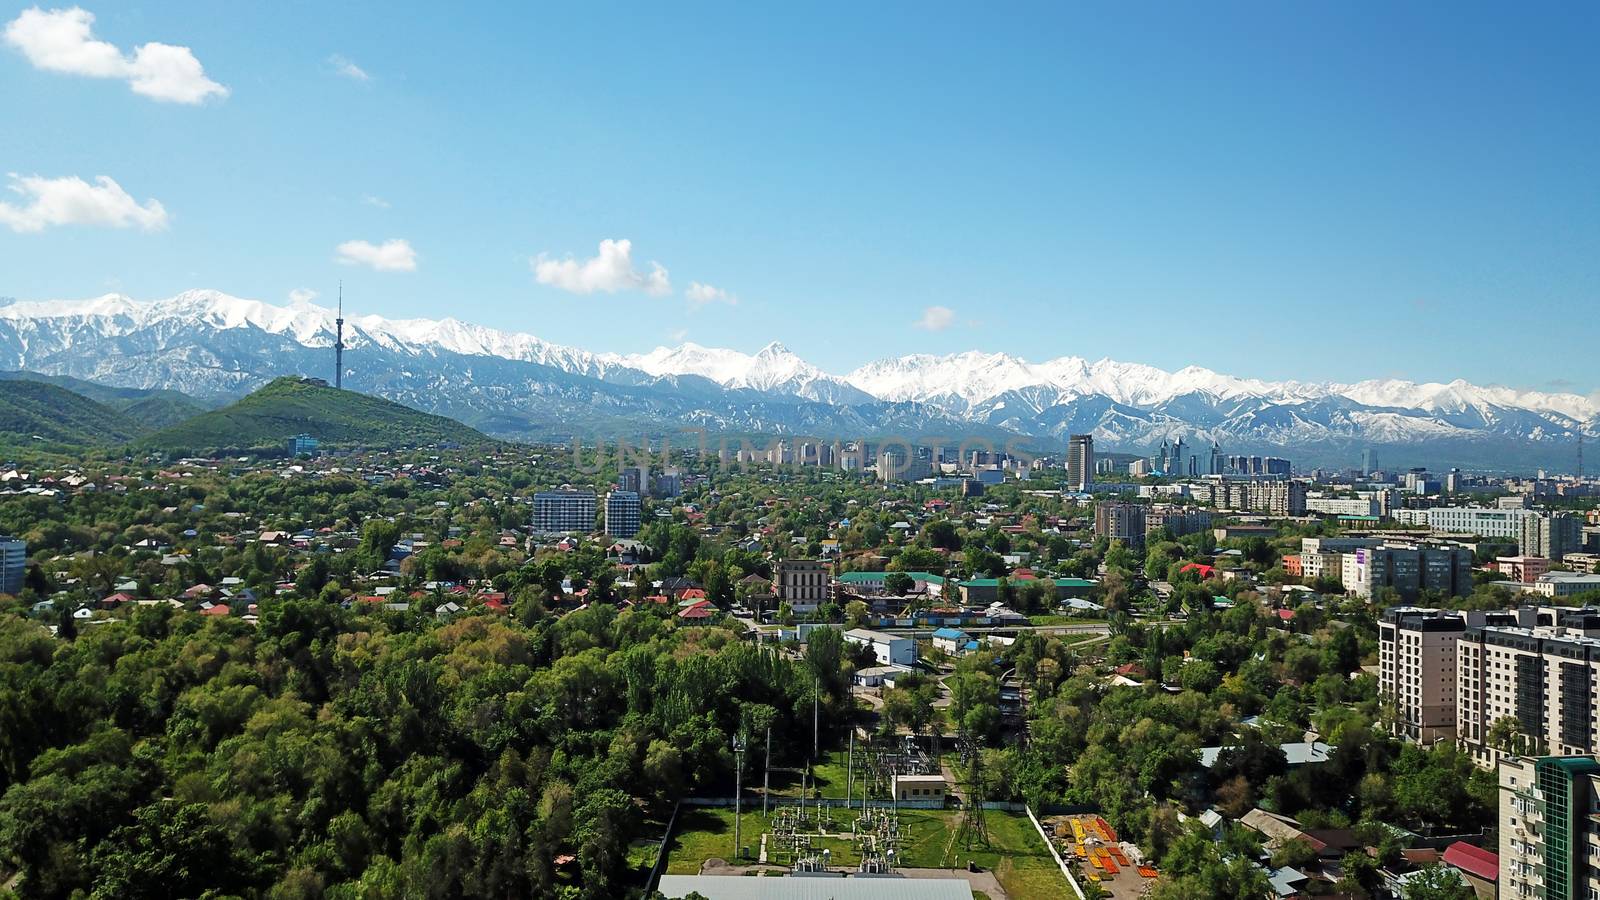 Almaty city Park with rides and a Ferris wheel. Completely green territory, lots of trees, grass, flowers. People are resting. View from a drone. Colored cabs of the Ferris wheel. Clean air and nature